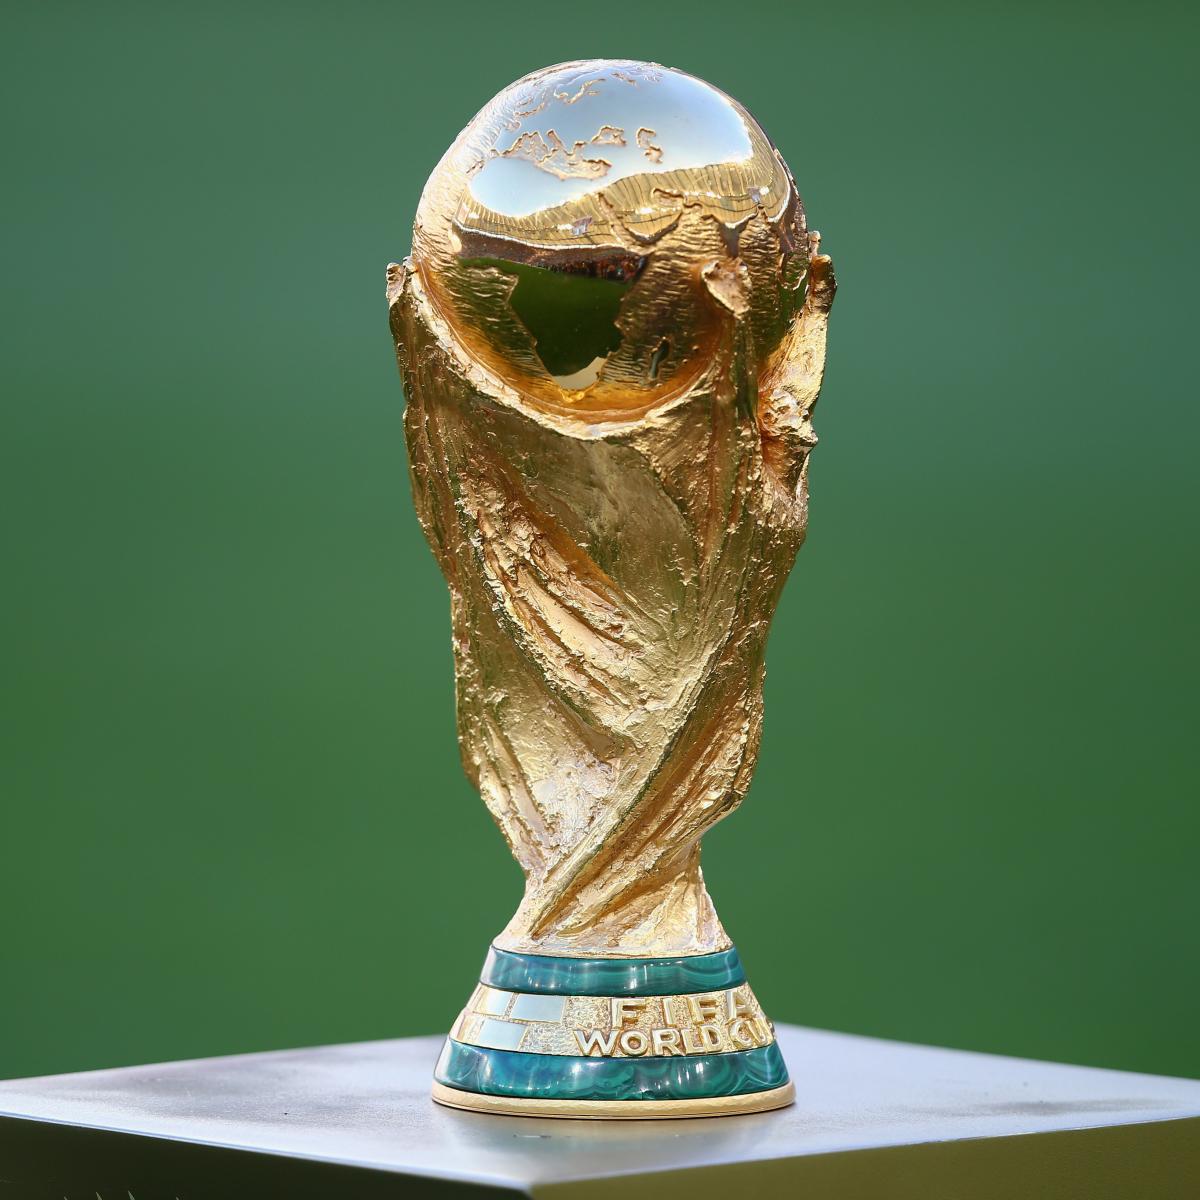 The most expensive football trophy in the world is the FIFA World